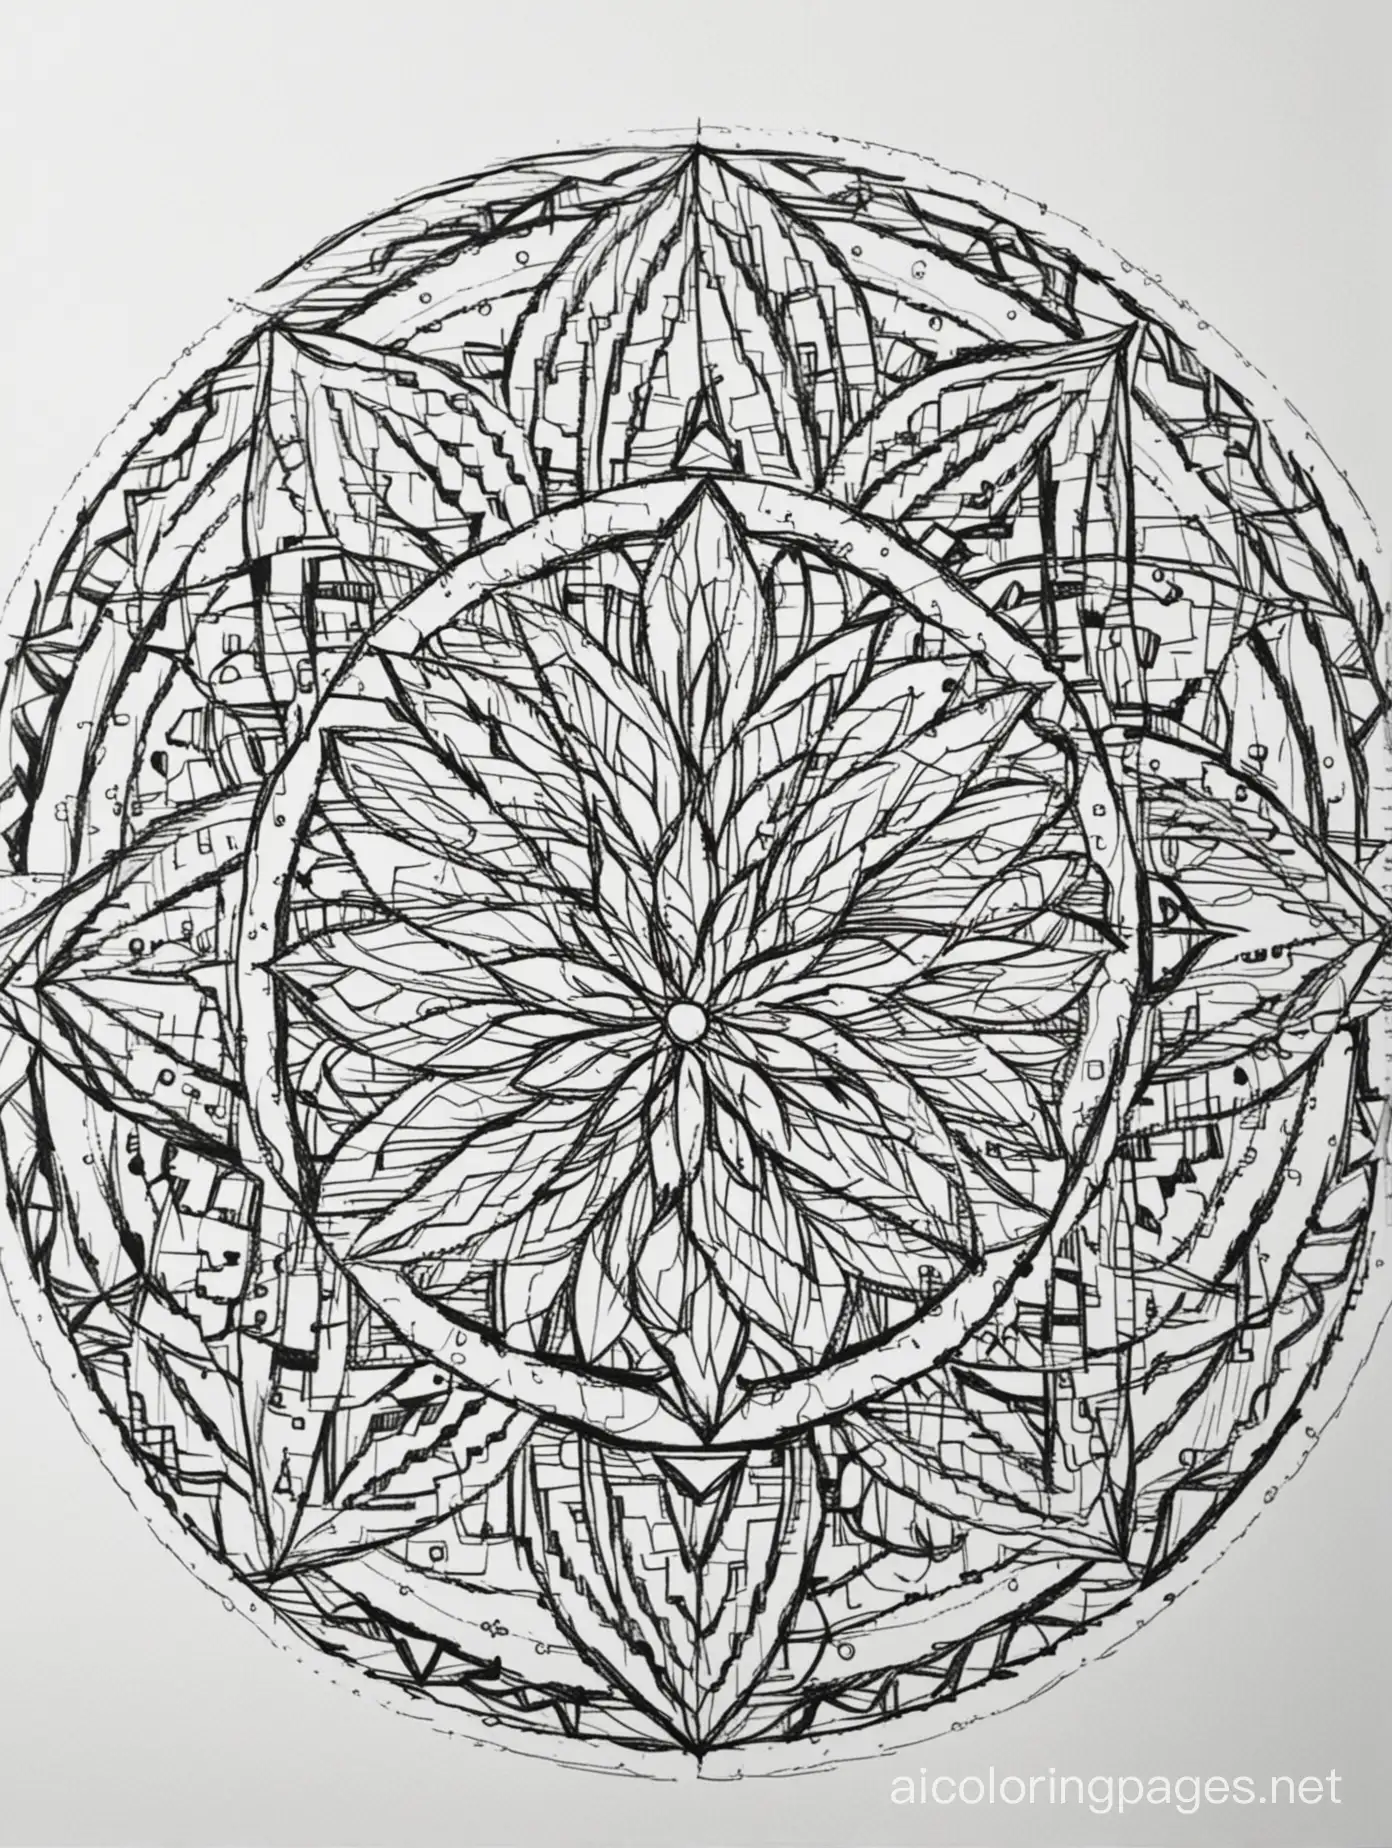 Create a geometrical Mandala coloring page , Coloring Page, black and white, line art, white background, Simplicity, Ample White Space. The background of the coloring page is plain white to make it easy for young children to color within the lines. The outlines of all the subjects are easy to distinguish, making it simple for kids to color without too much difficulty